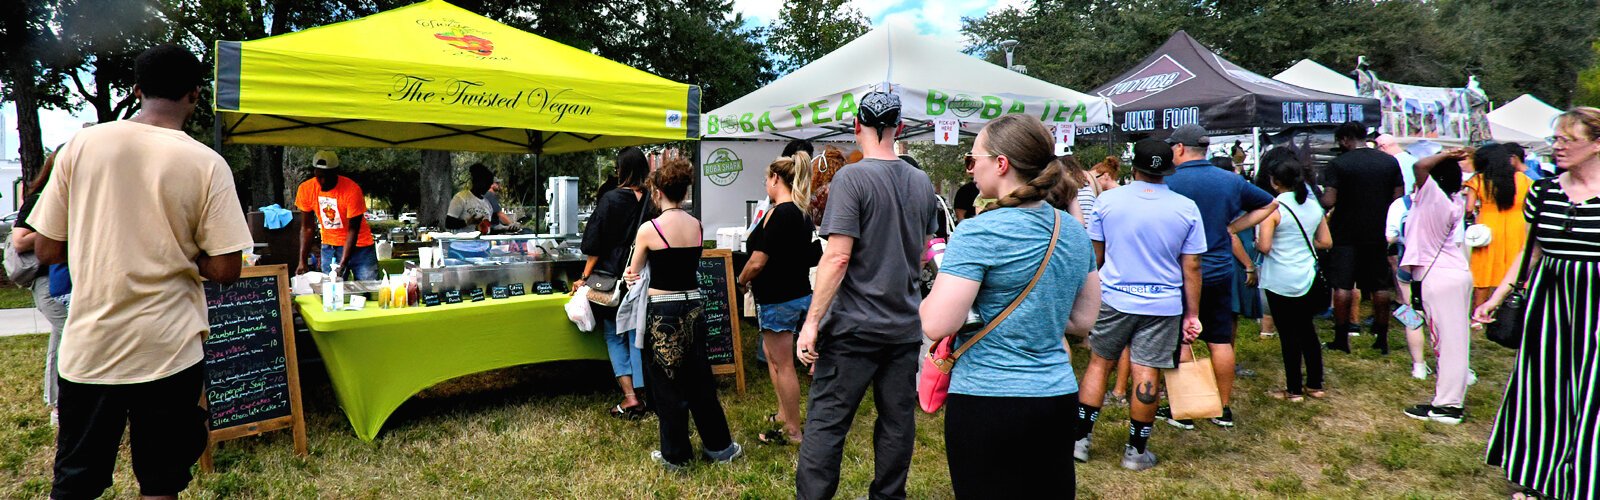 Tampa Bay VegFest 2022 was well attended by the Tampa Bay community. In 2016, the festival won the Juror’s Choice Award from Tampa’s Urban Excellence Awards.